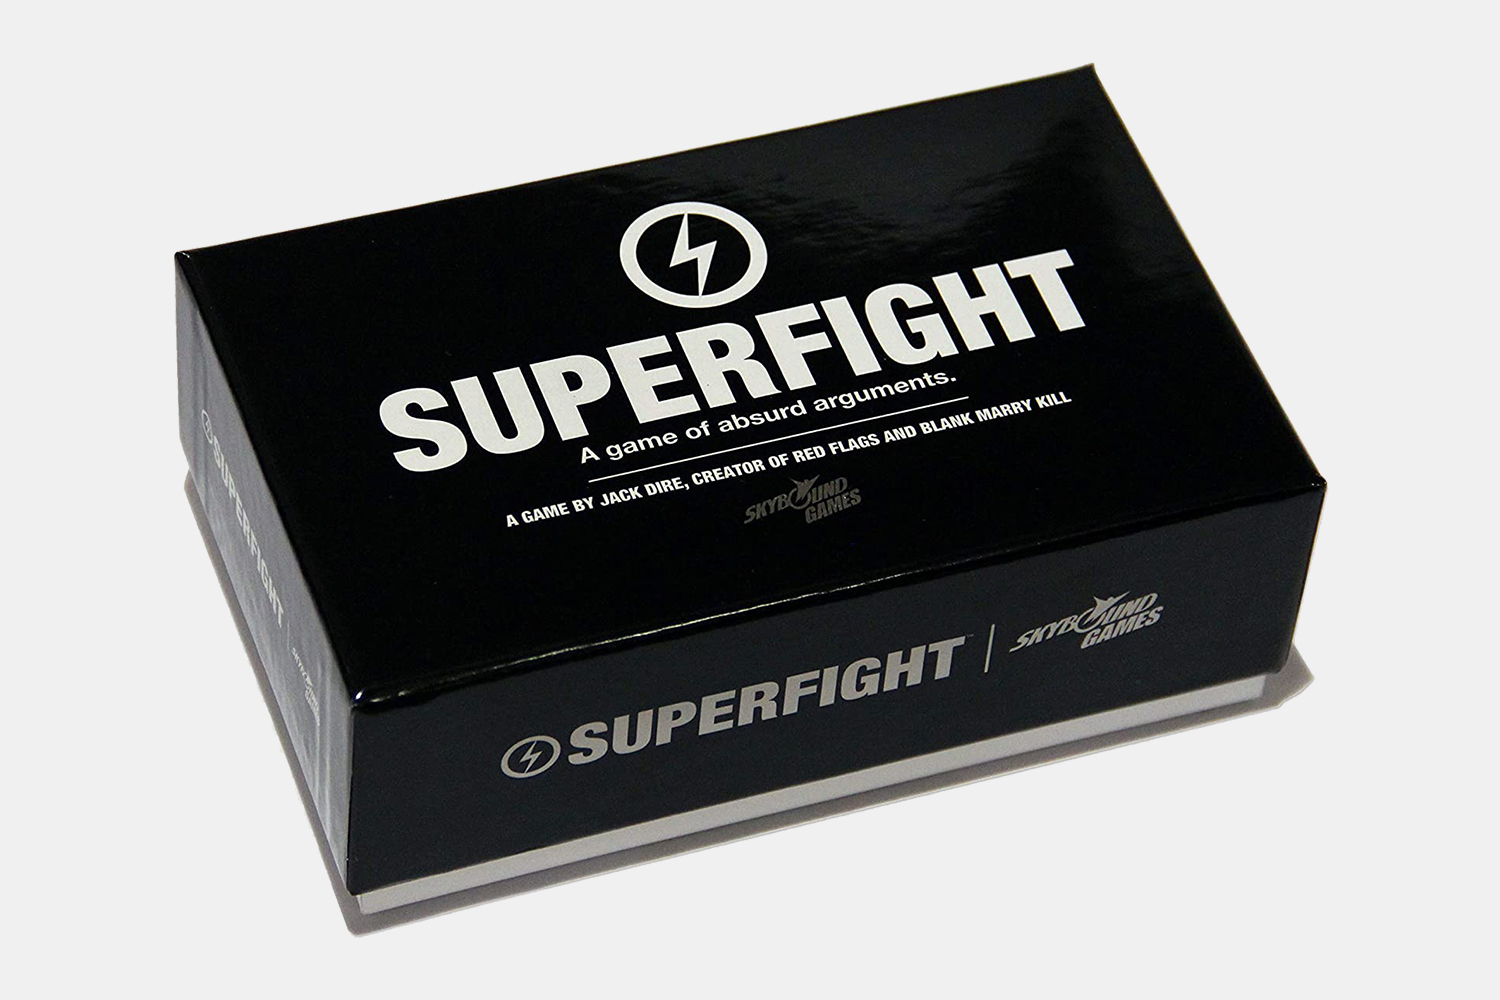 Superfight card game